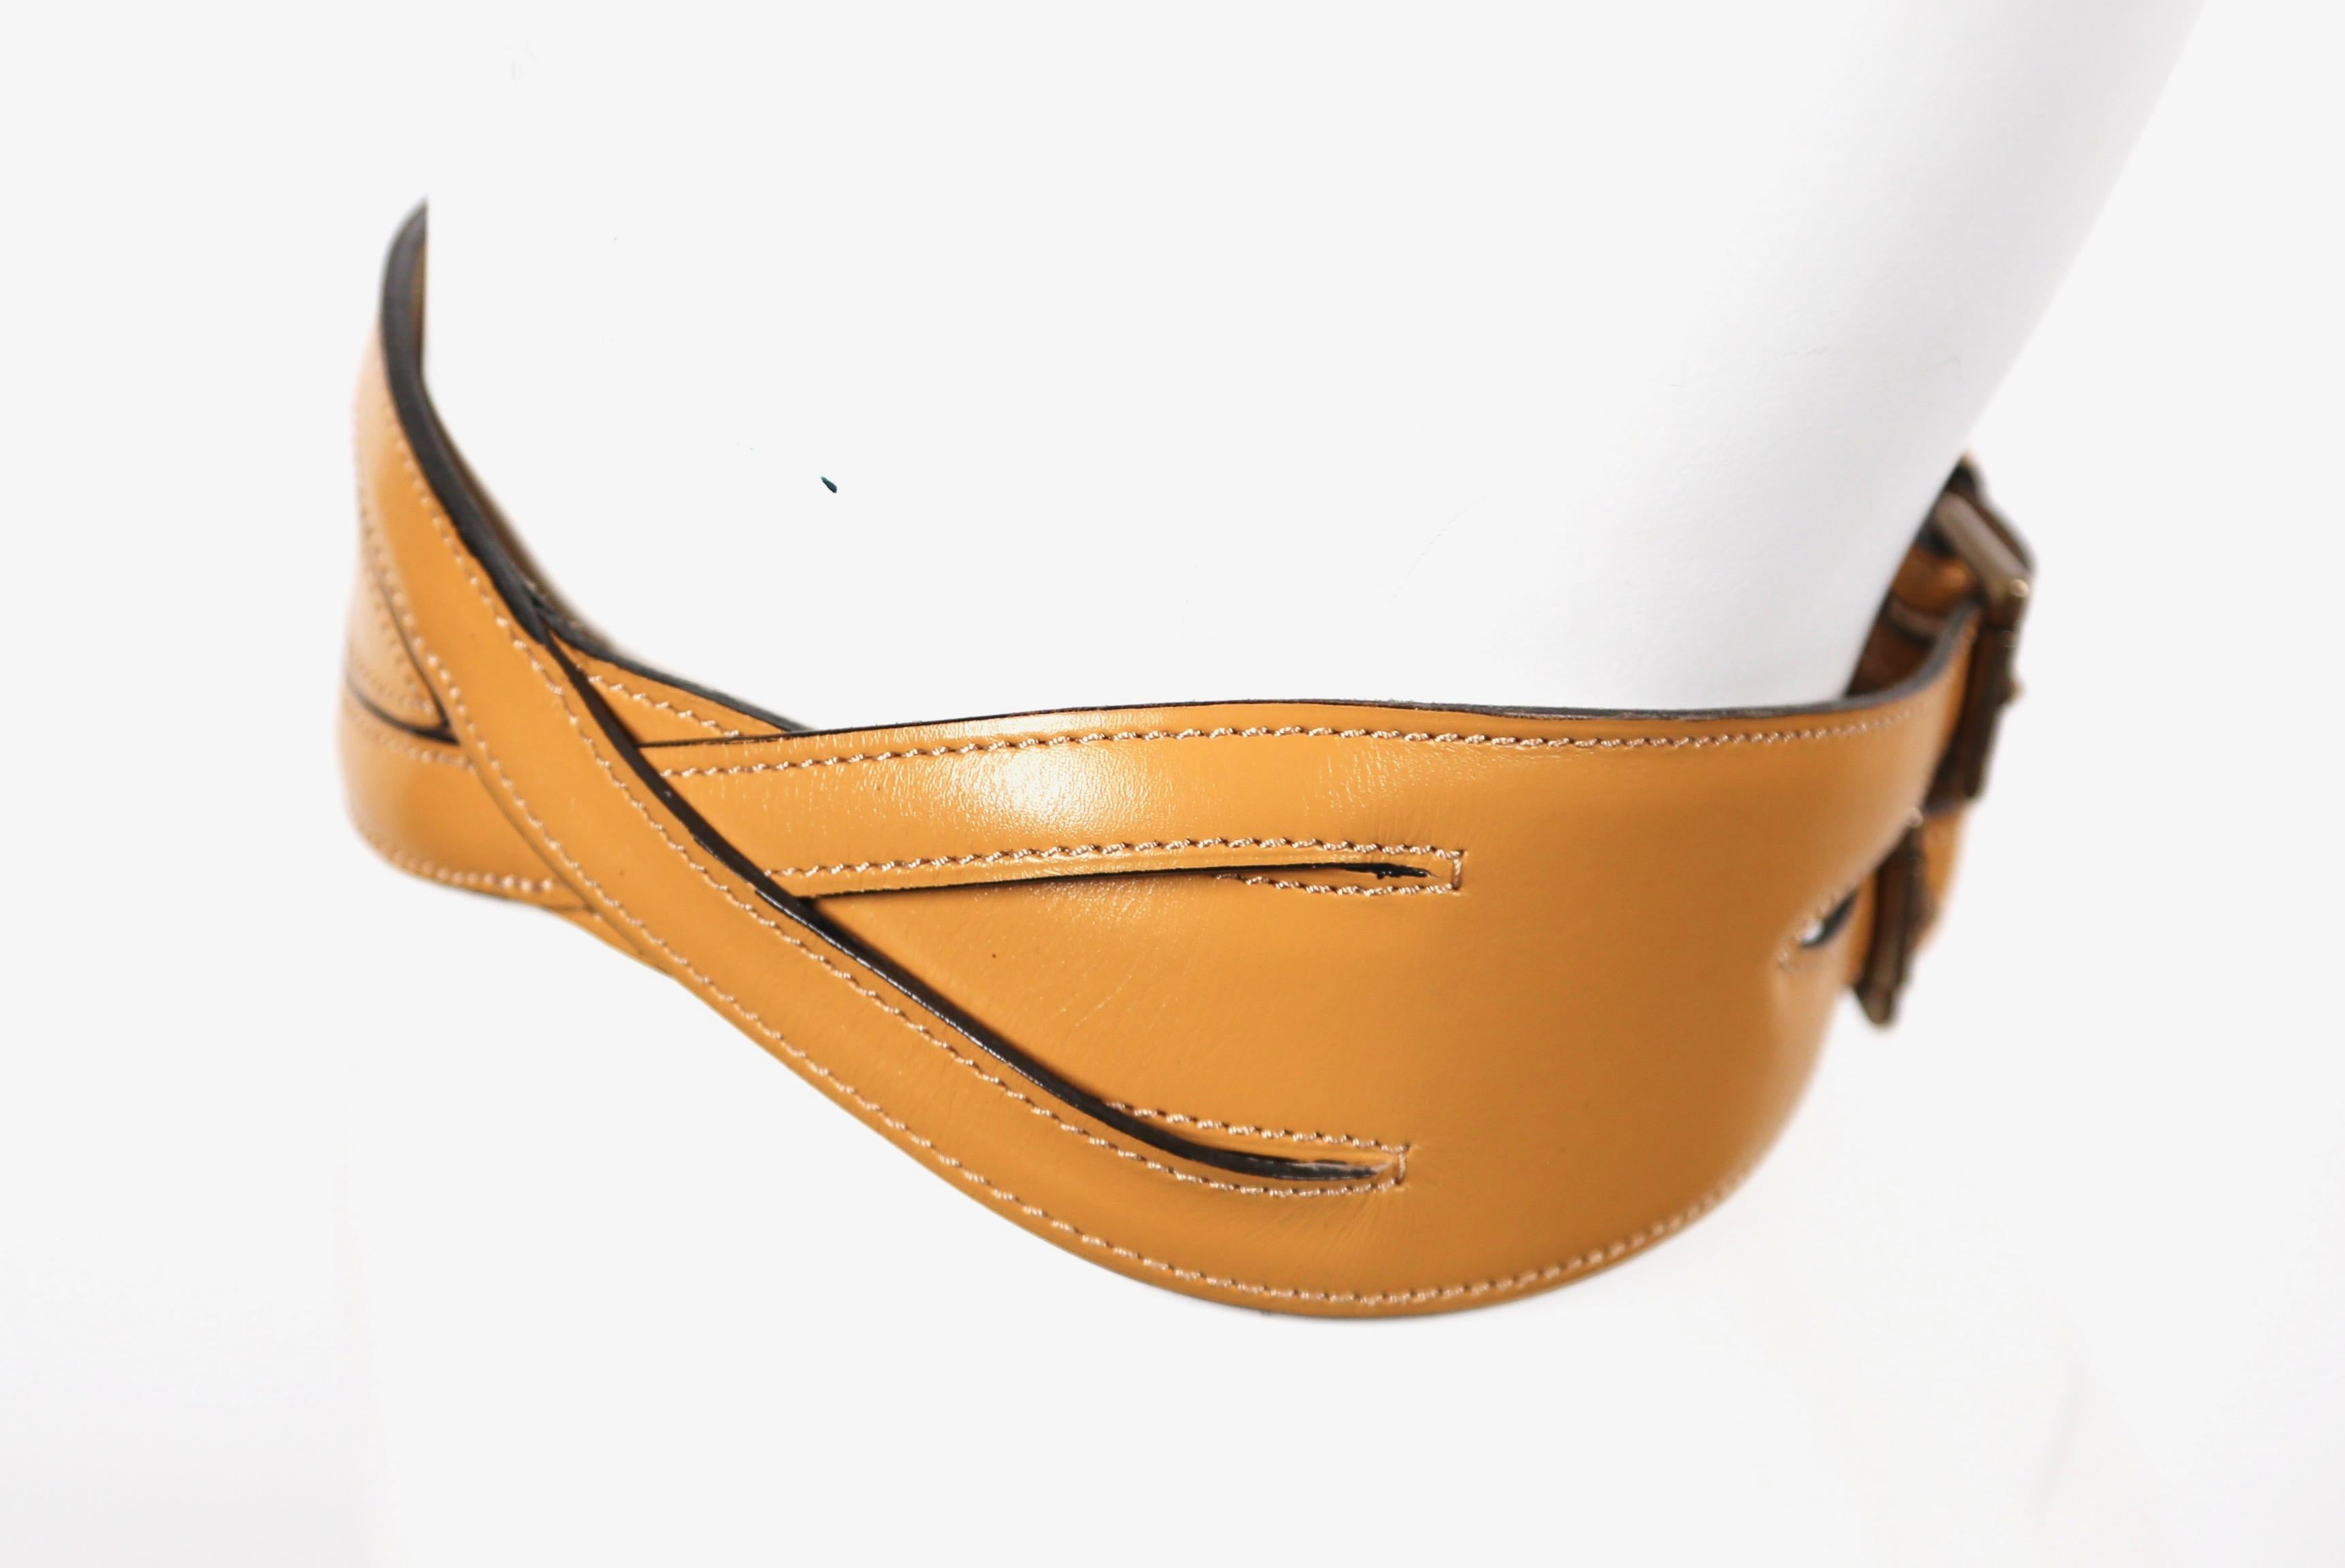 Rich tan leather belt with brass hardware designed by Azzedine Alaia dating to fall of 1990 as seen on the runway. Labeled a French size 65. Fits a 24-26